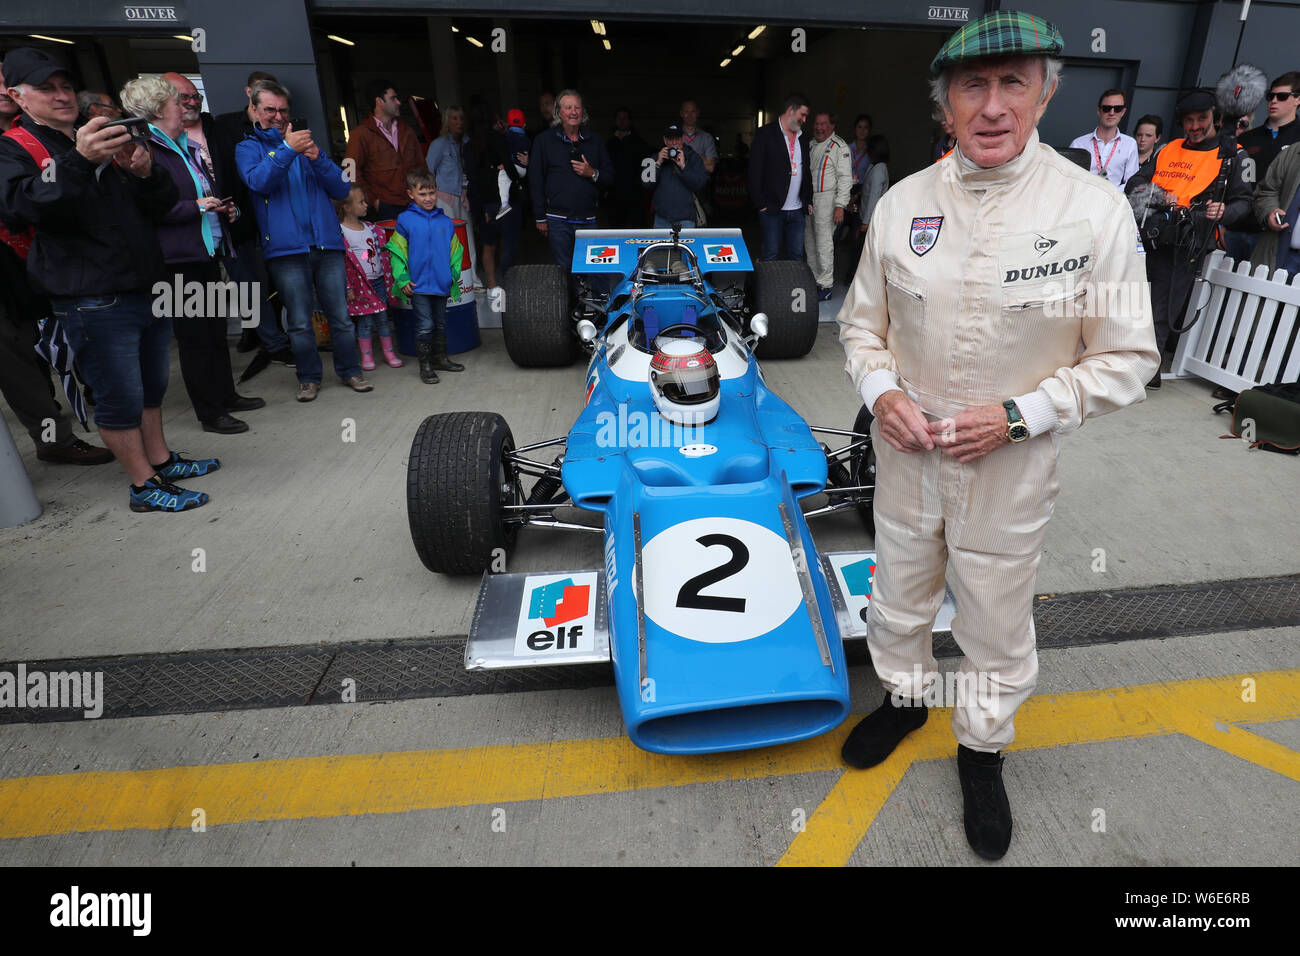 Sir Jackie Stewart OBE drives his 1969 Matra MS80-02 Formula One car at the 2019 Silverstone Classic Stock Photo